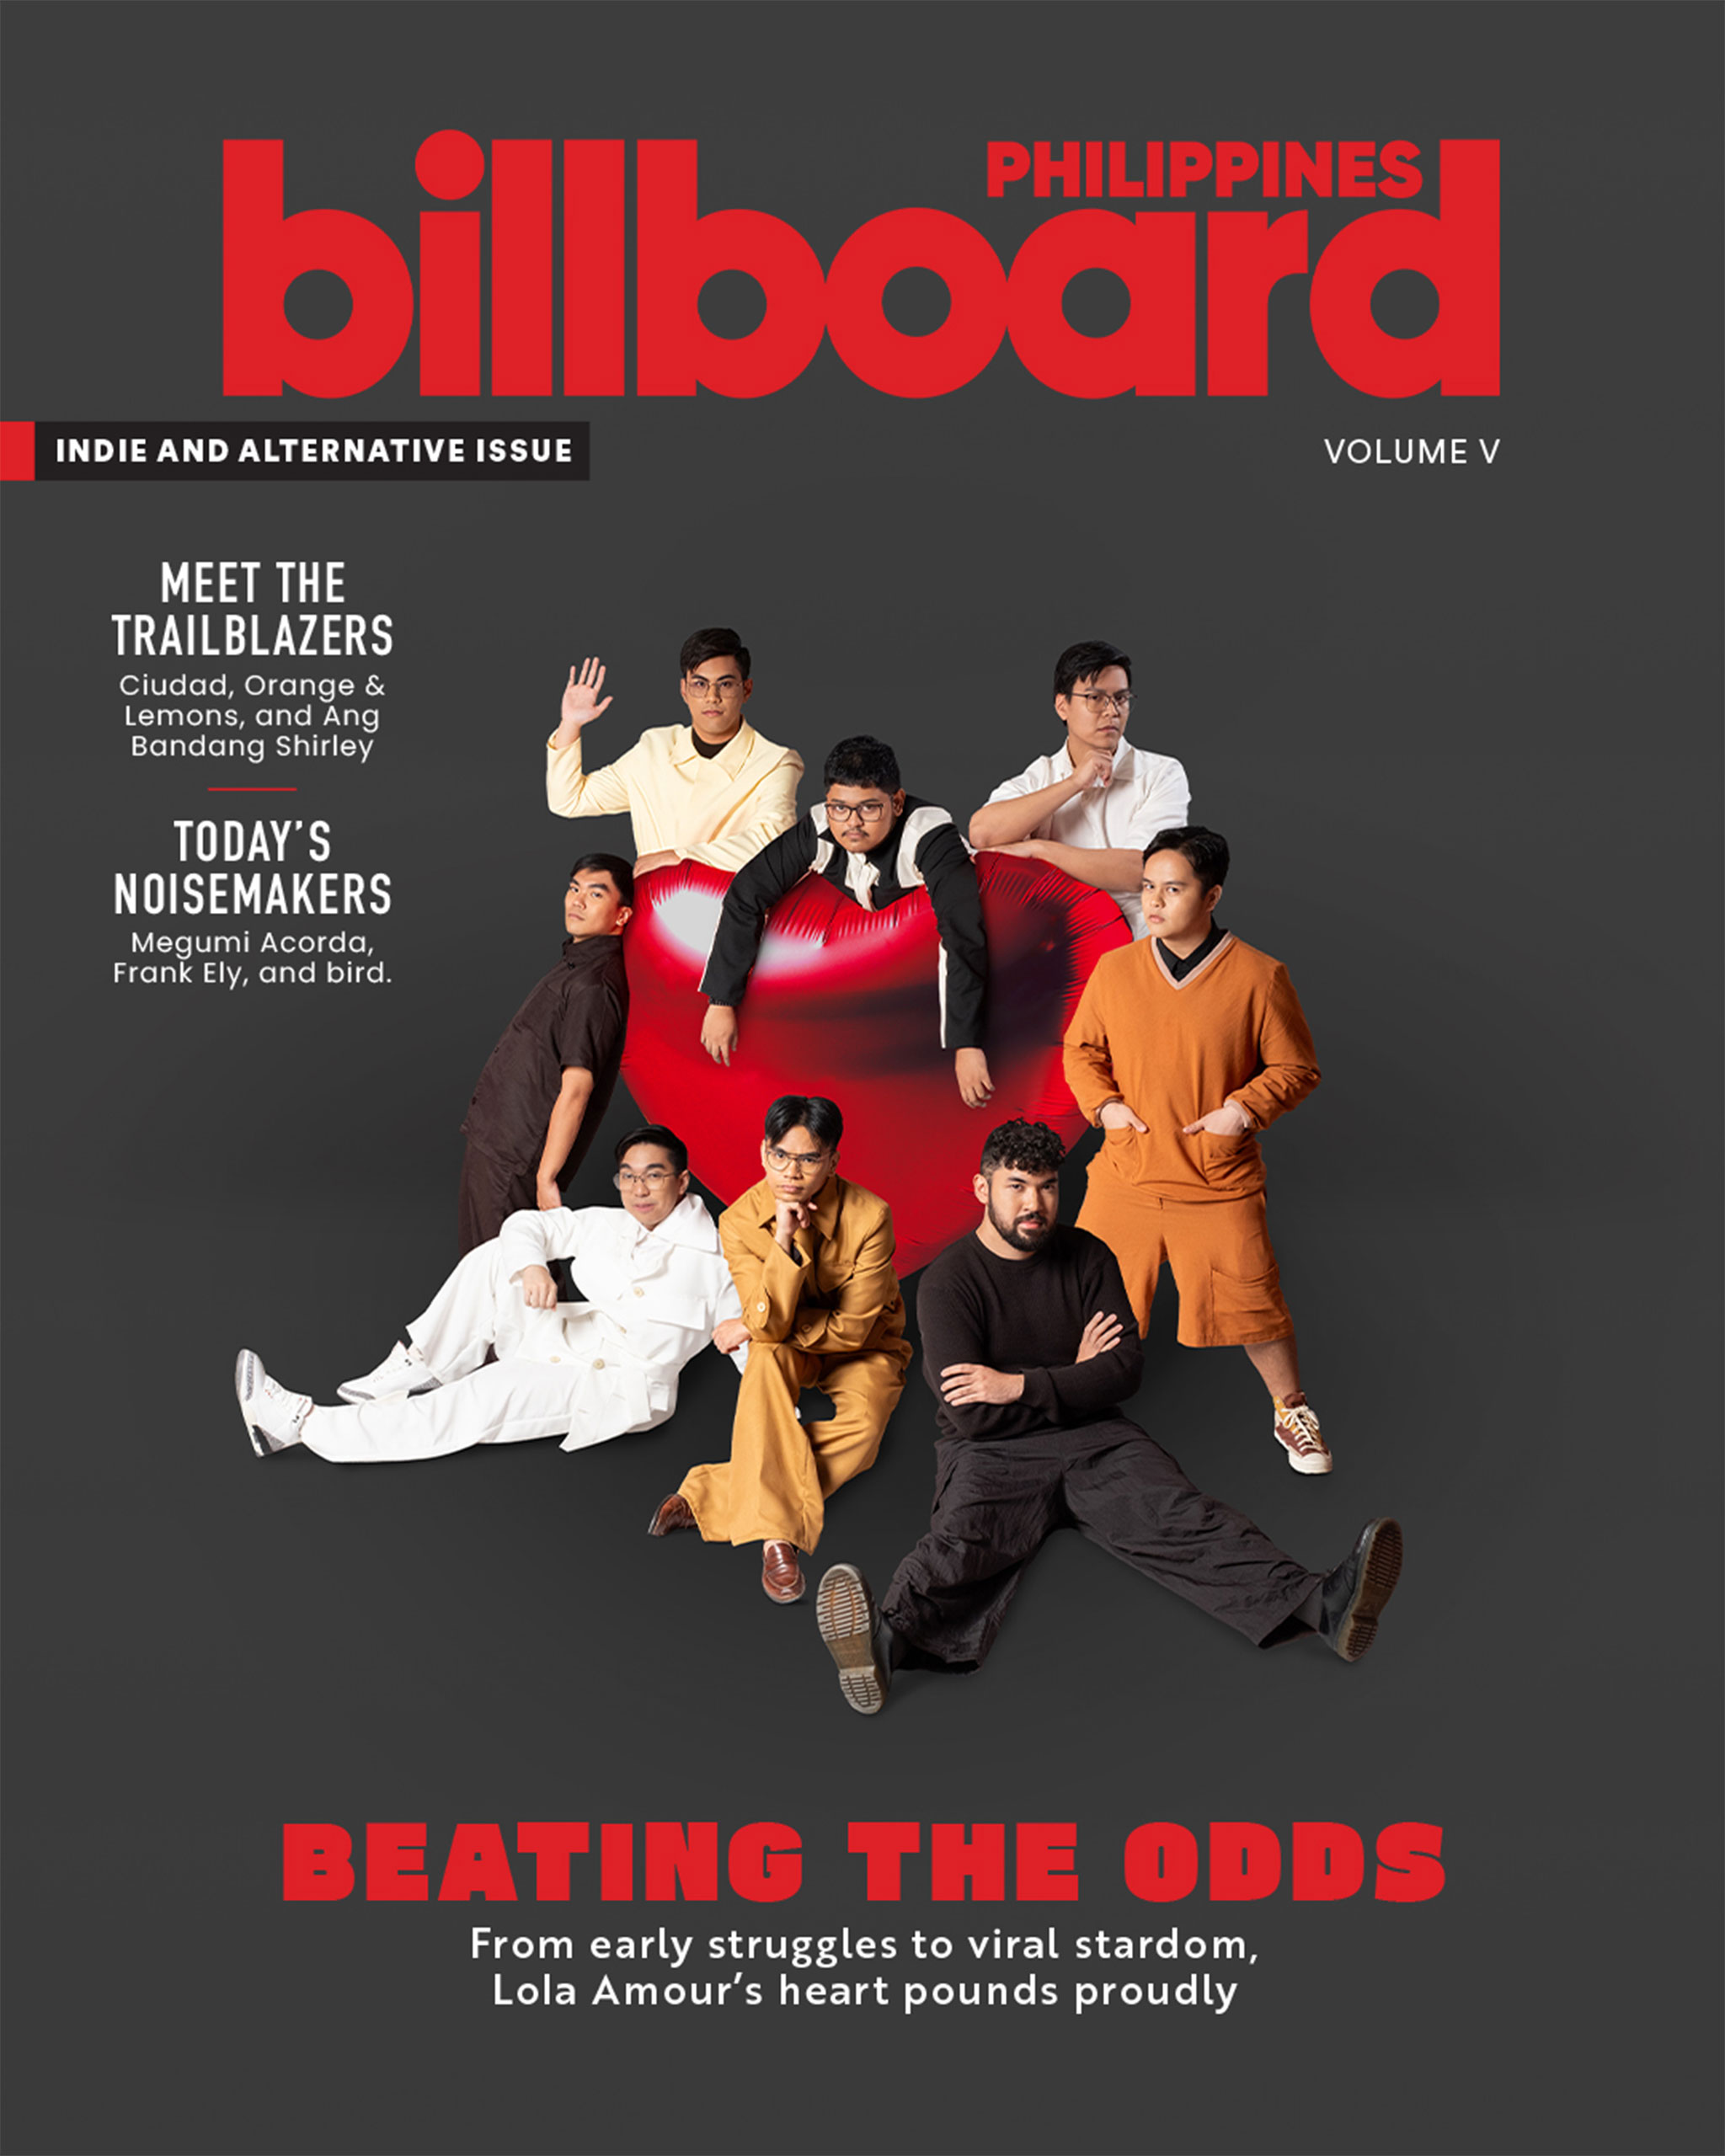 Lola Amour as the cover stars of the Billboard Philippines Indie and Alternative Issue